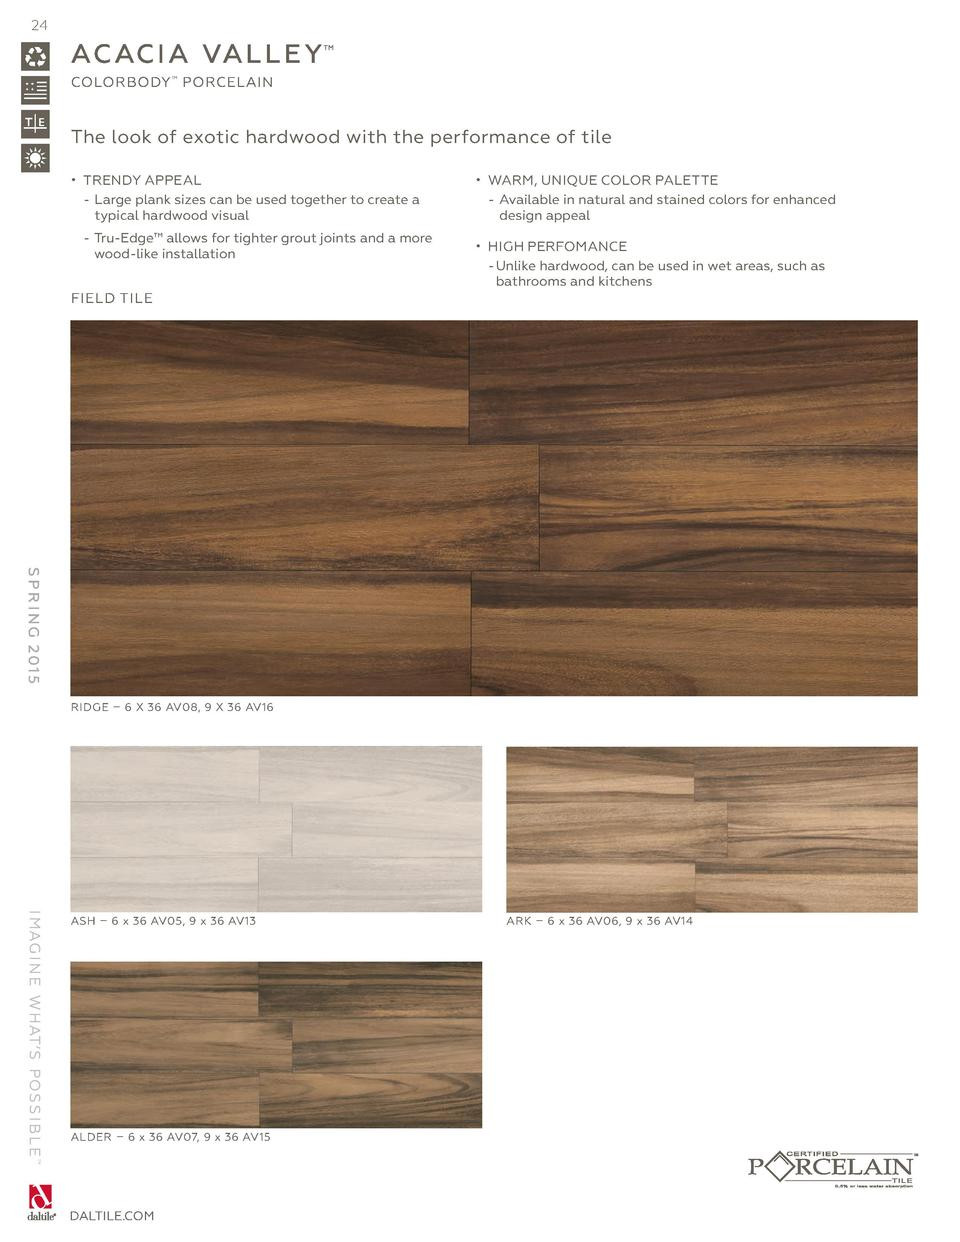 19 Fashionable ash Hardwood Flooring Pros and Cons 2023 free download ash hardwood flooring pros and cons of daltile spring 2015 catalog simplebooklet com throughout 24 ac ac i a val l e y colorbody porcelain the look of exotic hardwood with the performance